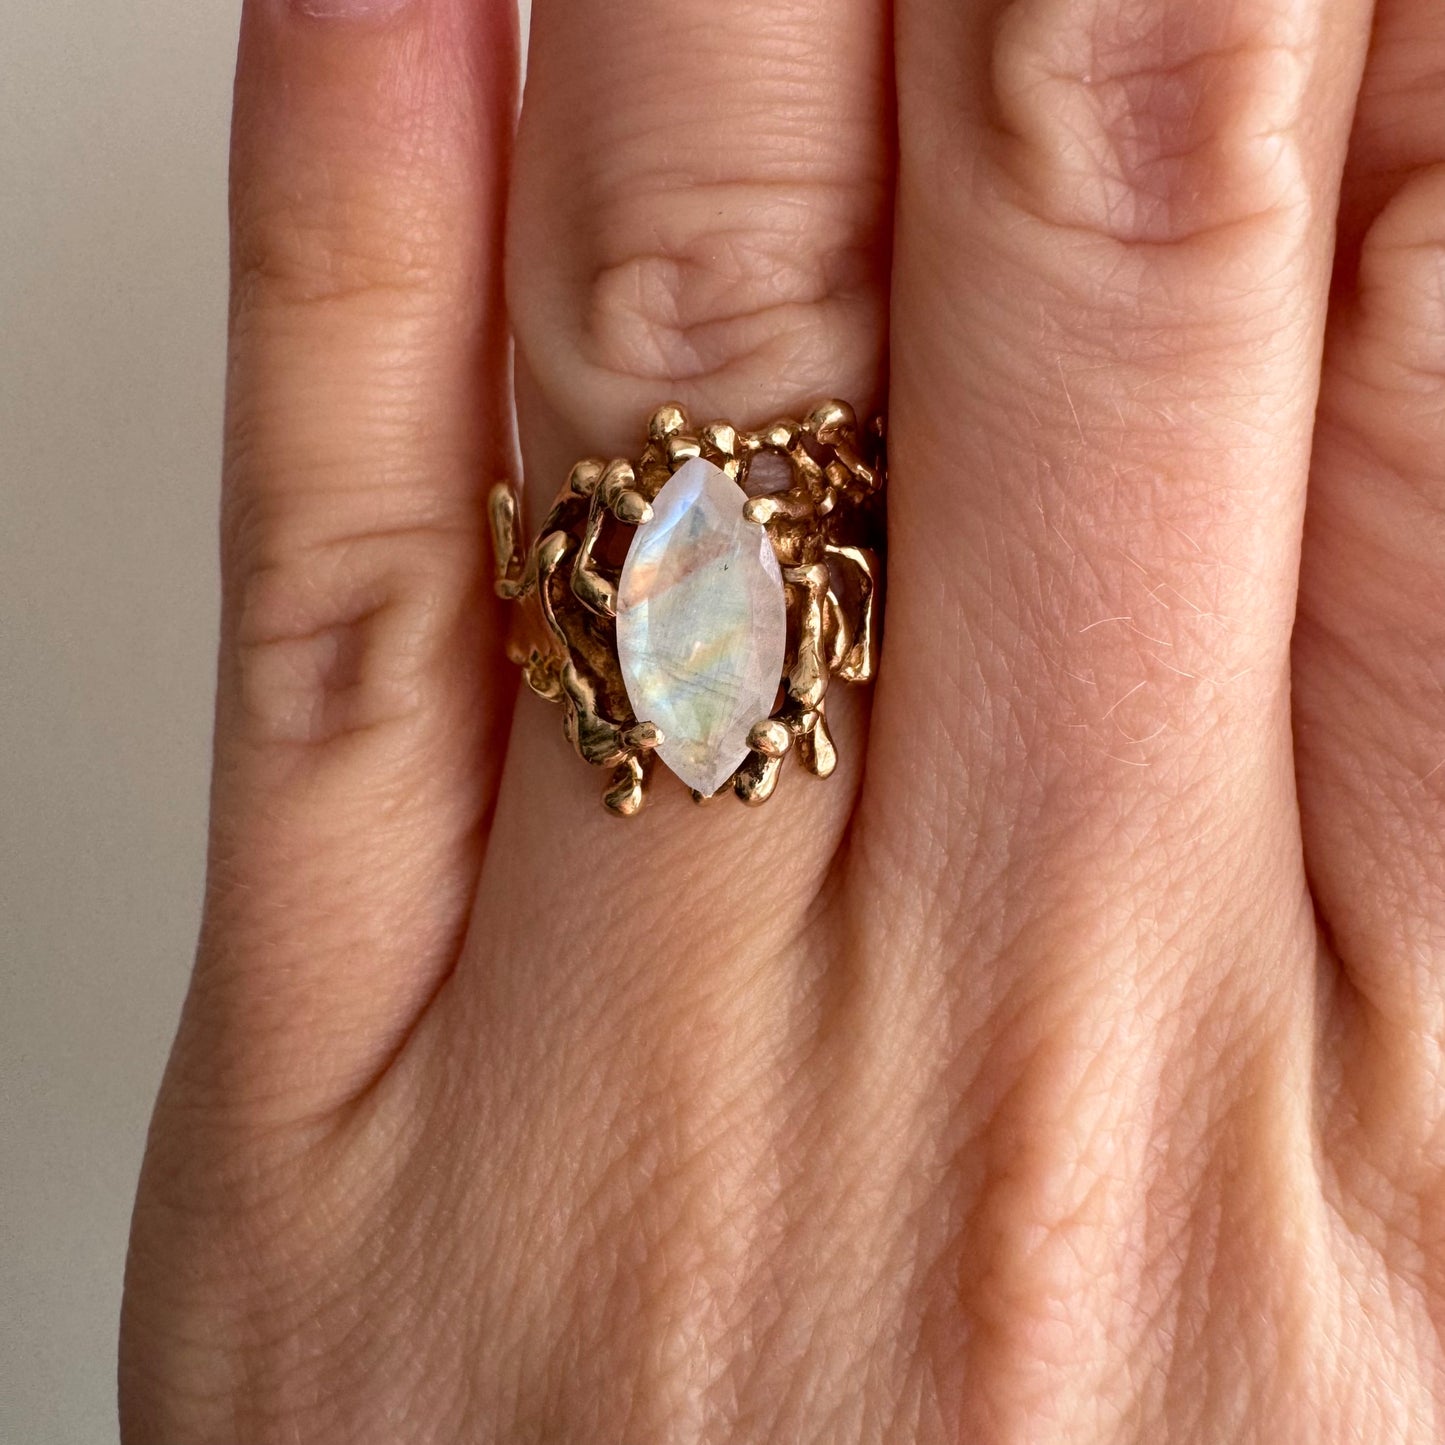 reimagined V I N T A G E // rainbow portal / 10k brutalist ring with rainbow moonstone / size 5.5